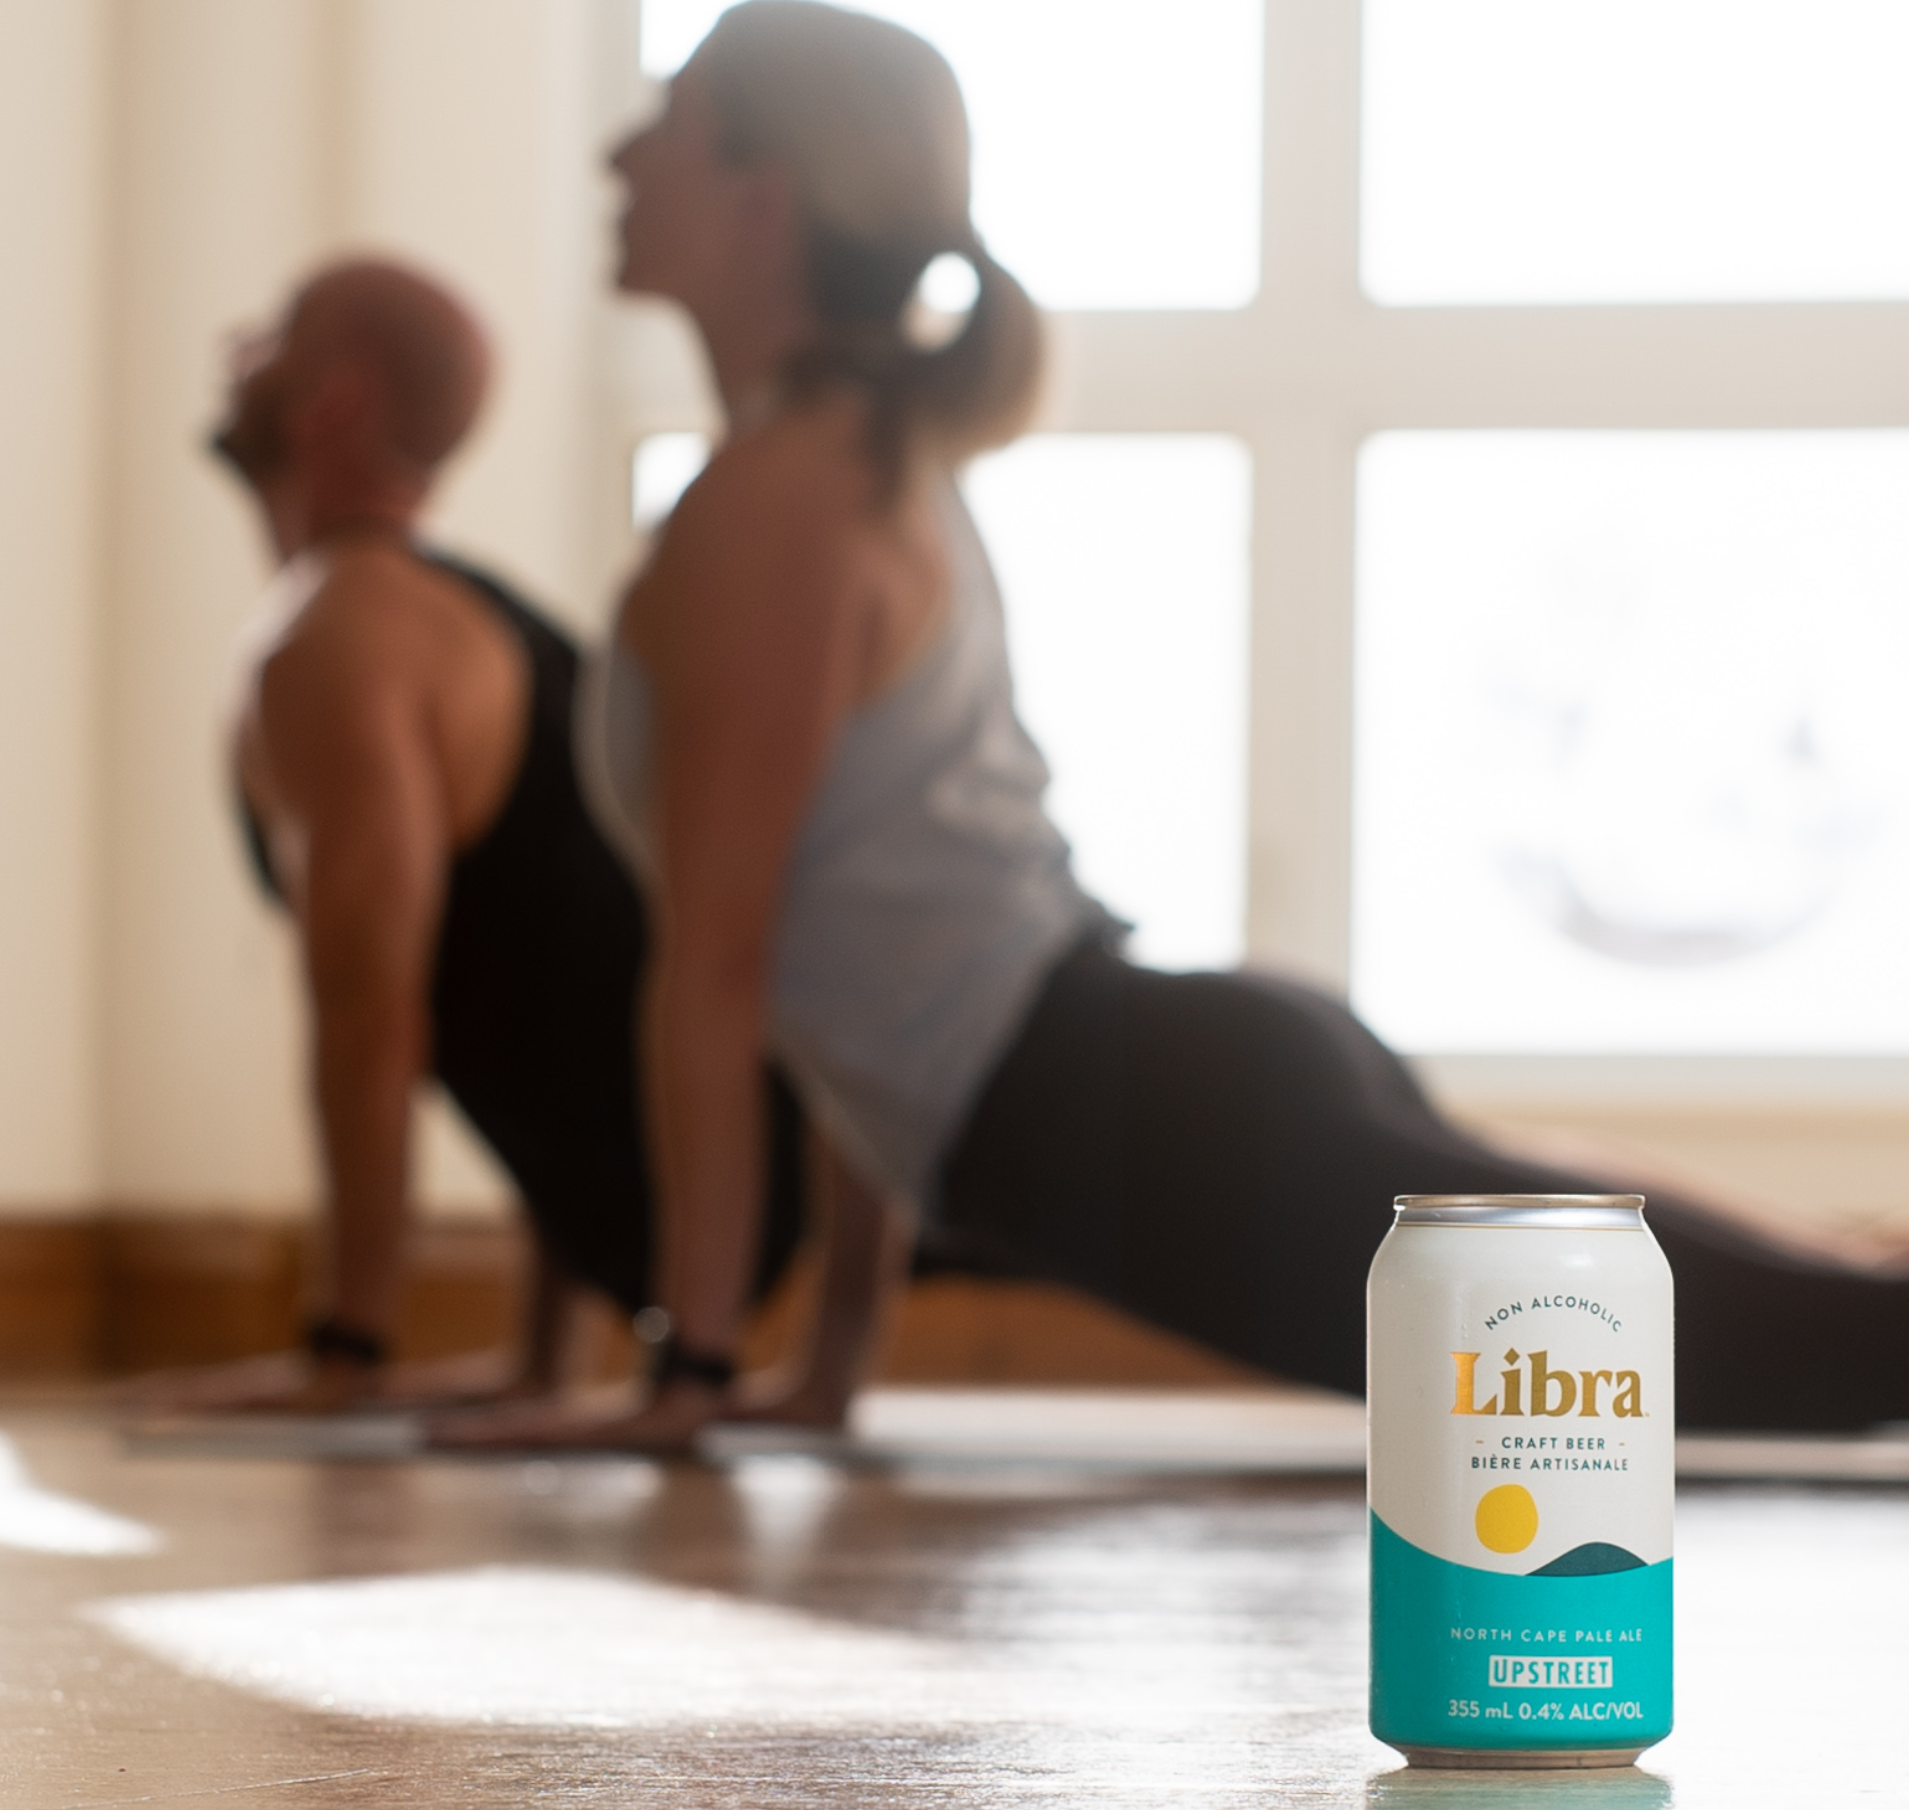 Two woman doing yoga poses. Libra is a craft brewery producing delicious non alcoholic craft beer for any balanced lifestyle.